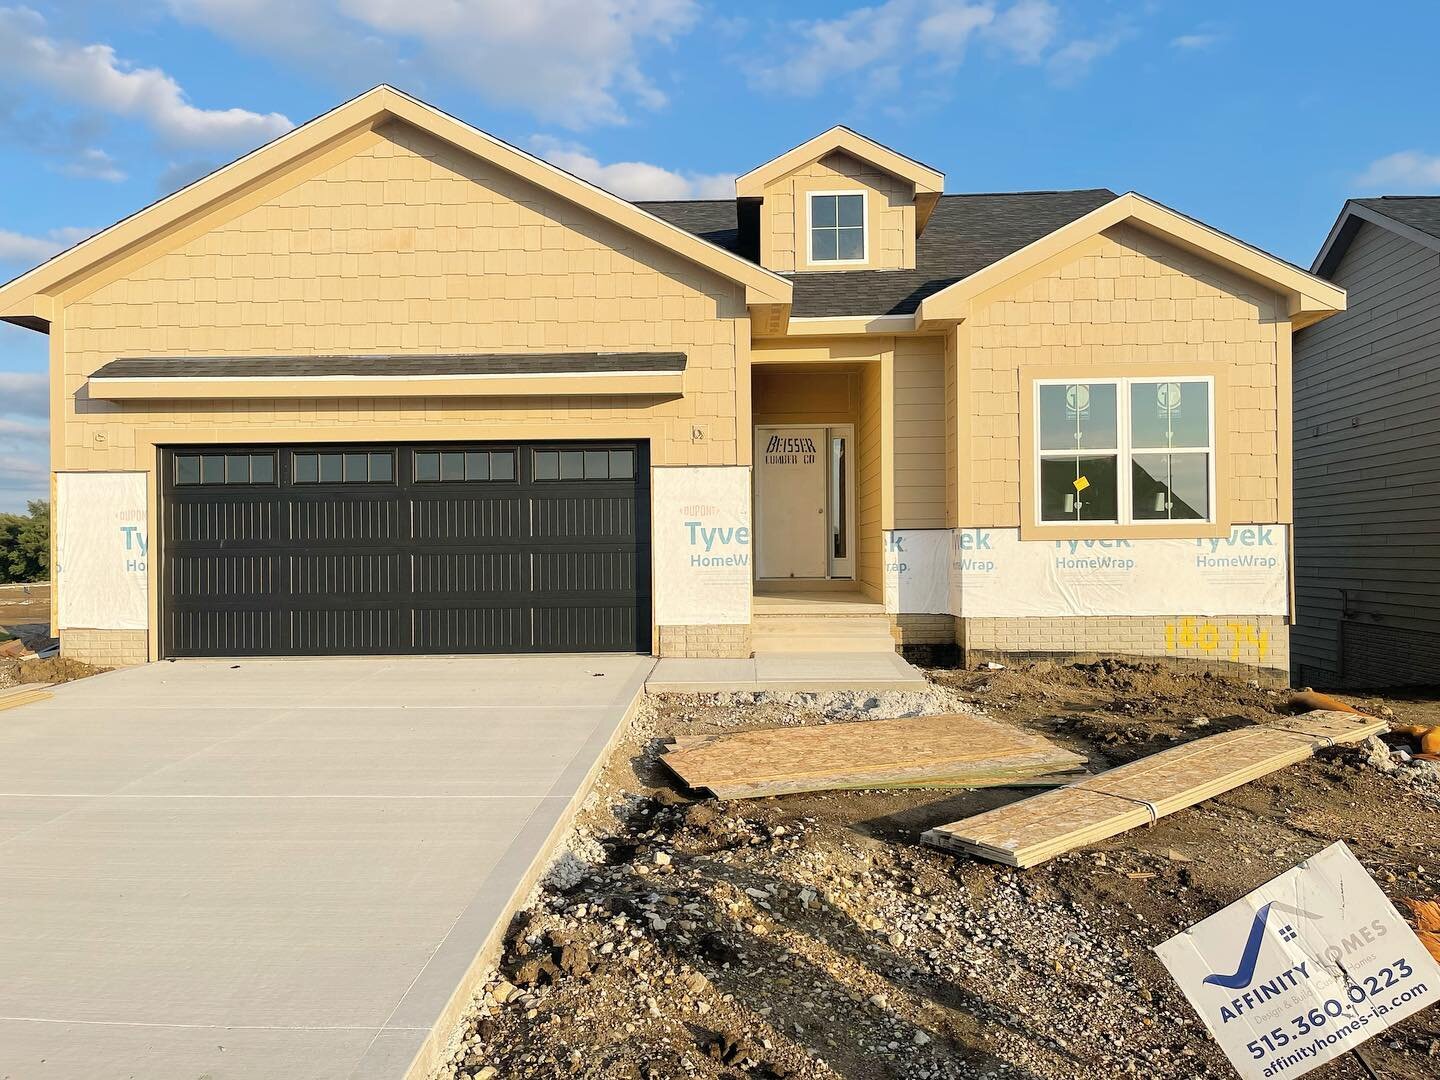 Black garage door has been installed on our Claire II Plan. Check out our stories for some of our build updates! #claireiibuild
.
#iowa #iowabusiness #iowahomebuilder #newconstruction #newconstructionhomes #iowabuilder #construction #customhome #cust